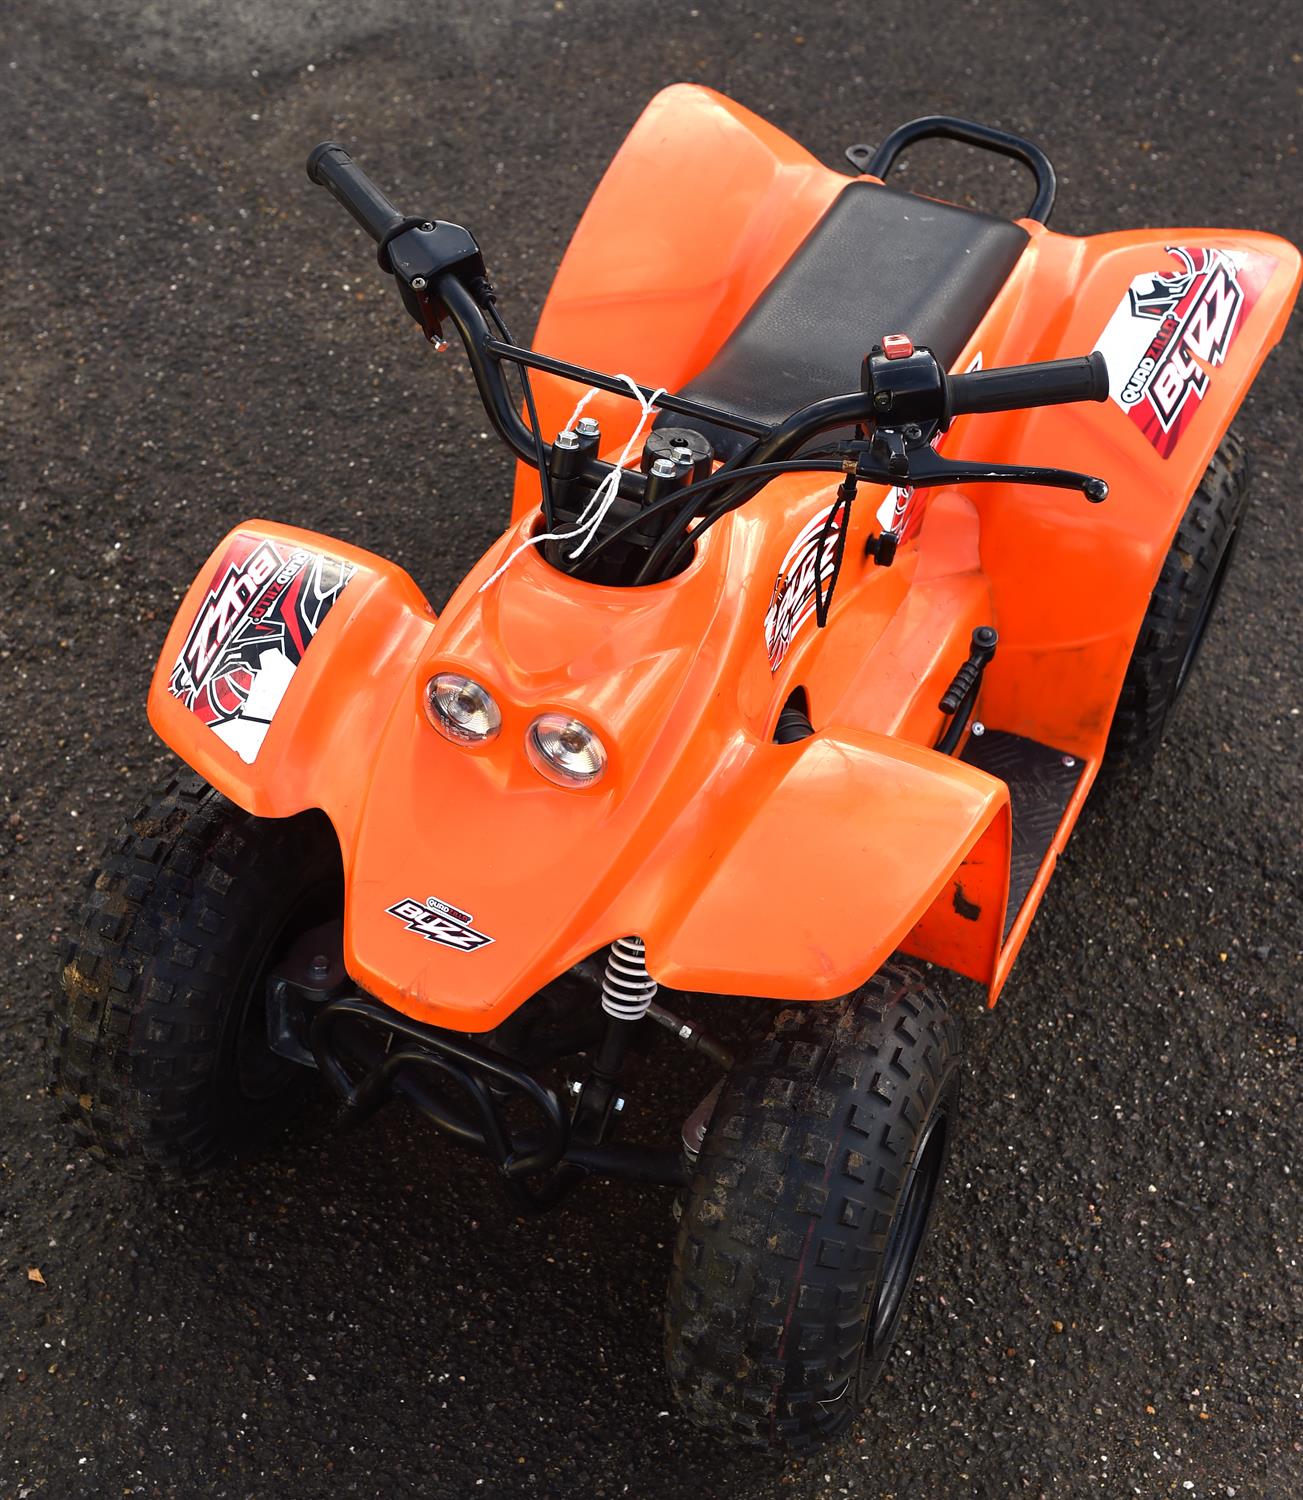 Buzz Quadzilla 50cc Quad bike. New battery fitted. Starts and runs well. A great first quad bike - Image 4 of 7